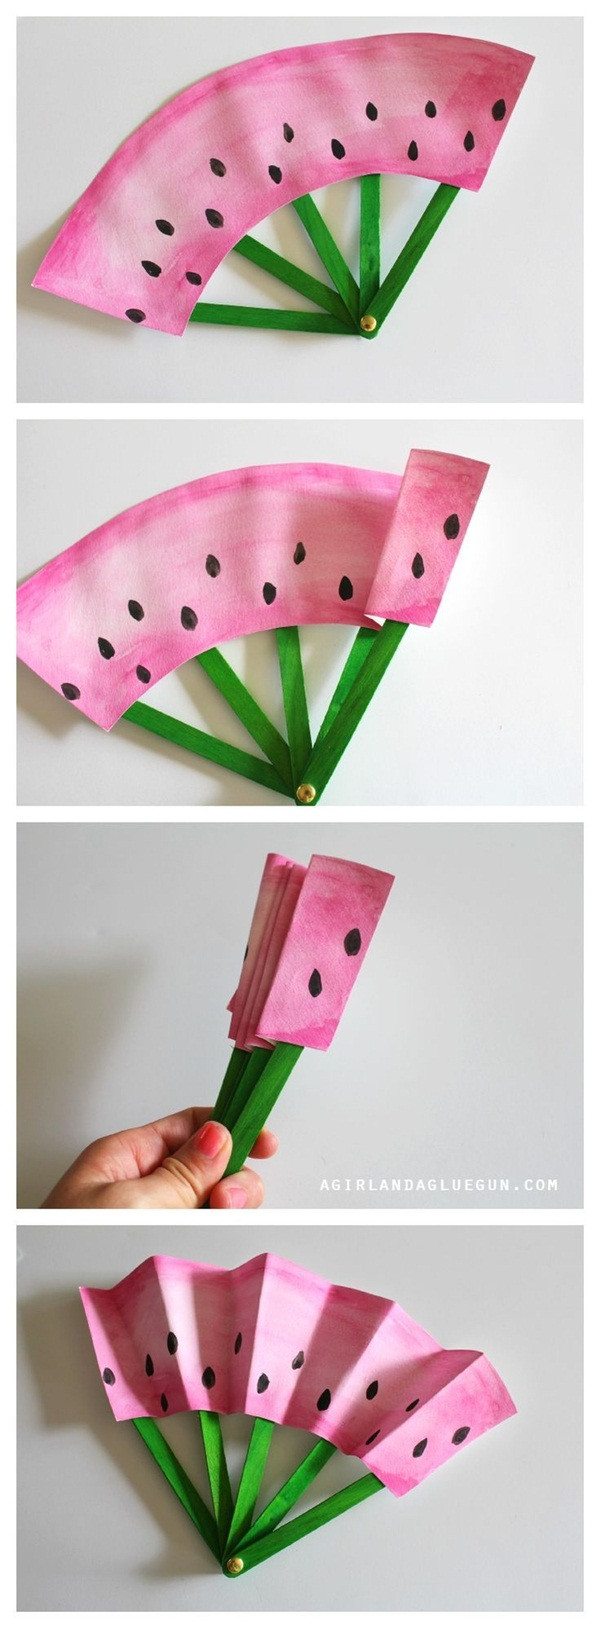 Craft Project For Toddler
 45 Fun DIY Summer Vacation Crafts for Kids